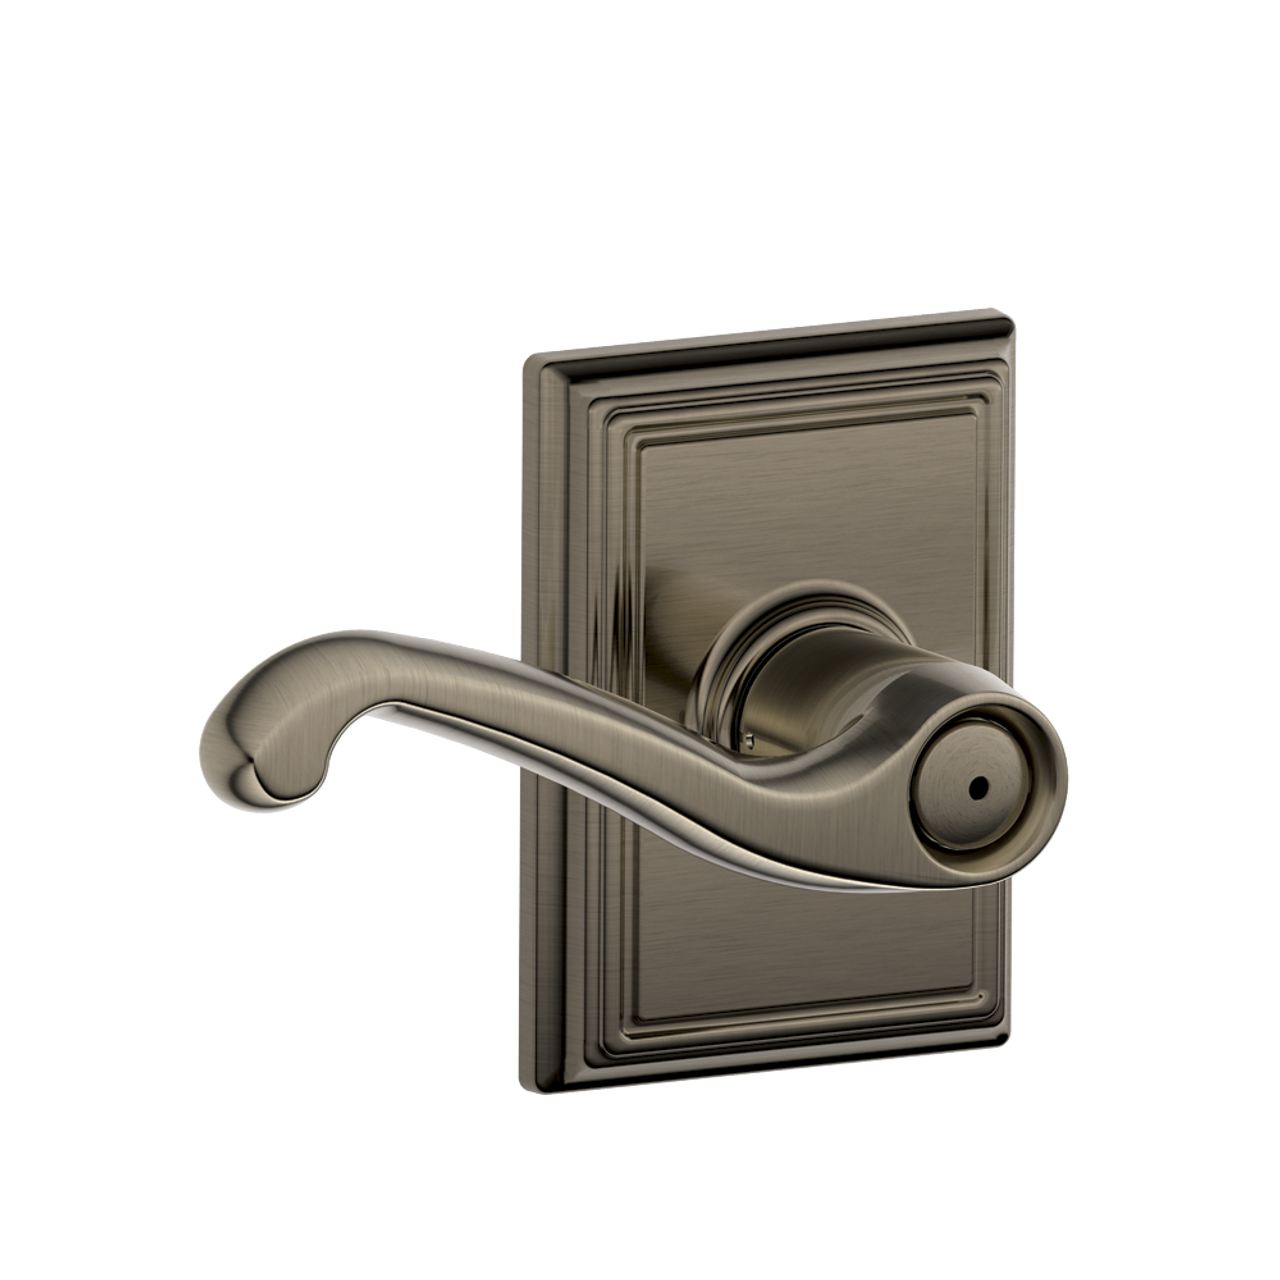 Schlage Privacy Flair Lever Door Lock with Addsion Trim